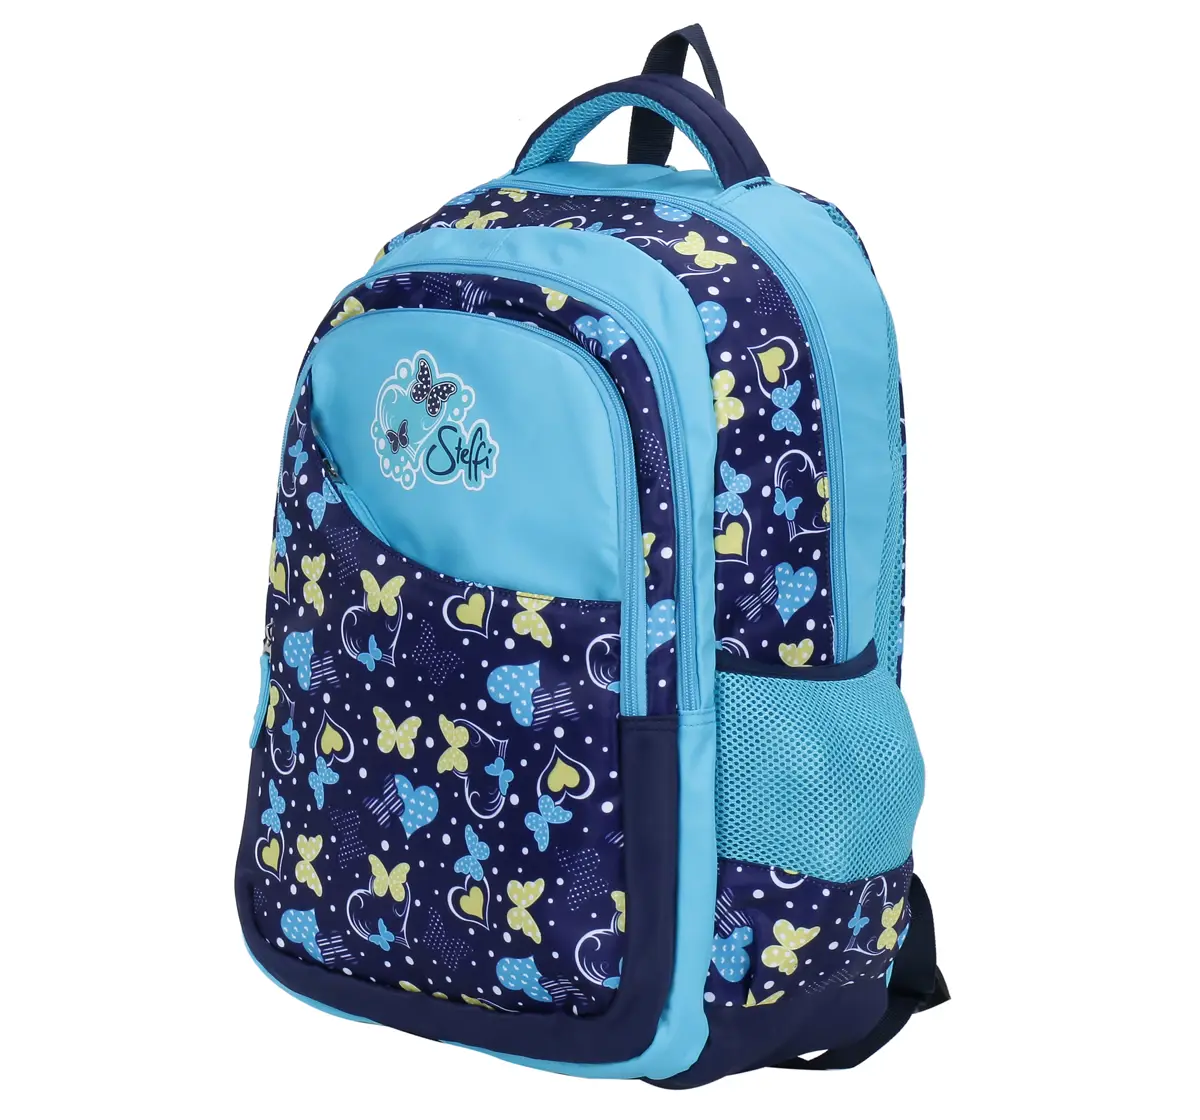 Simba Steffi Love Rising Sparkle 19 Backpack Multicolor 3Y+